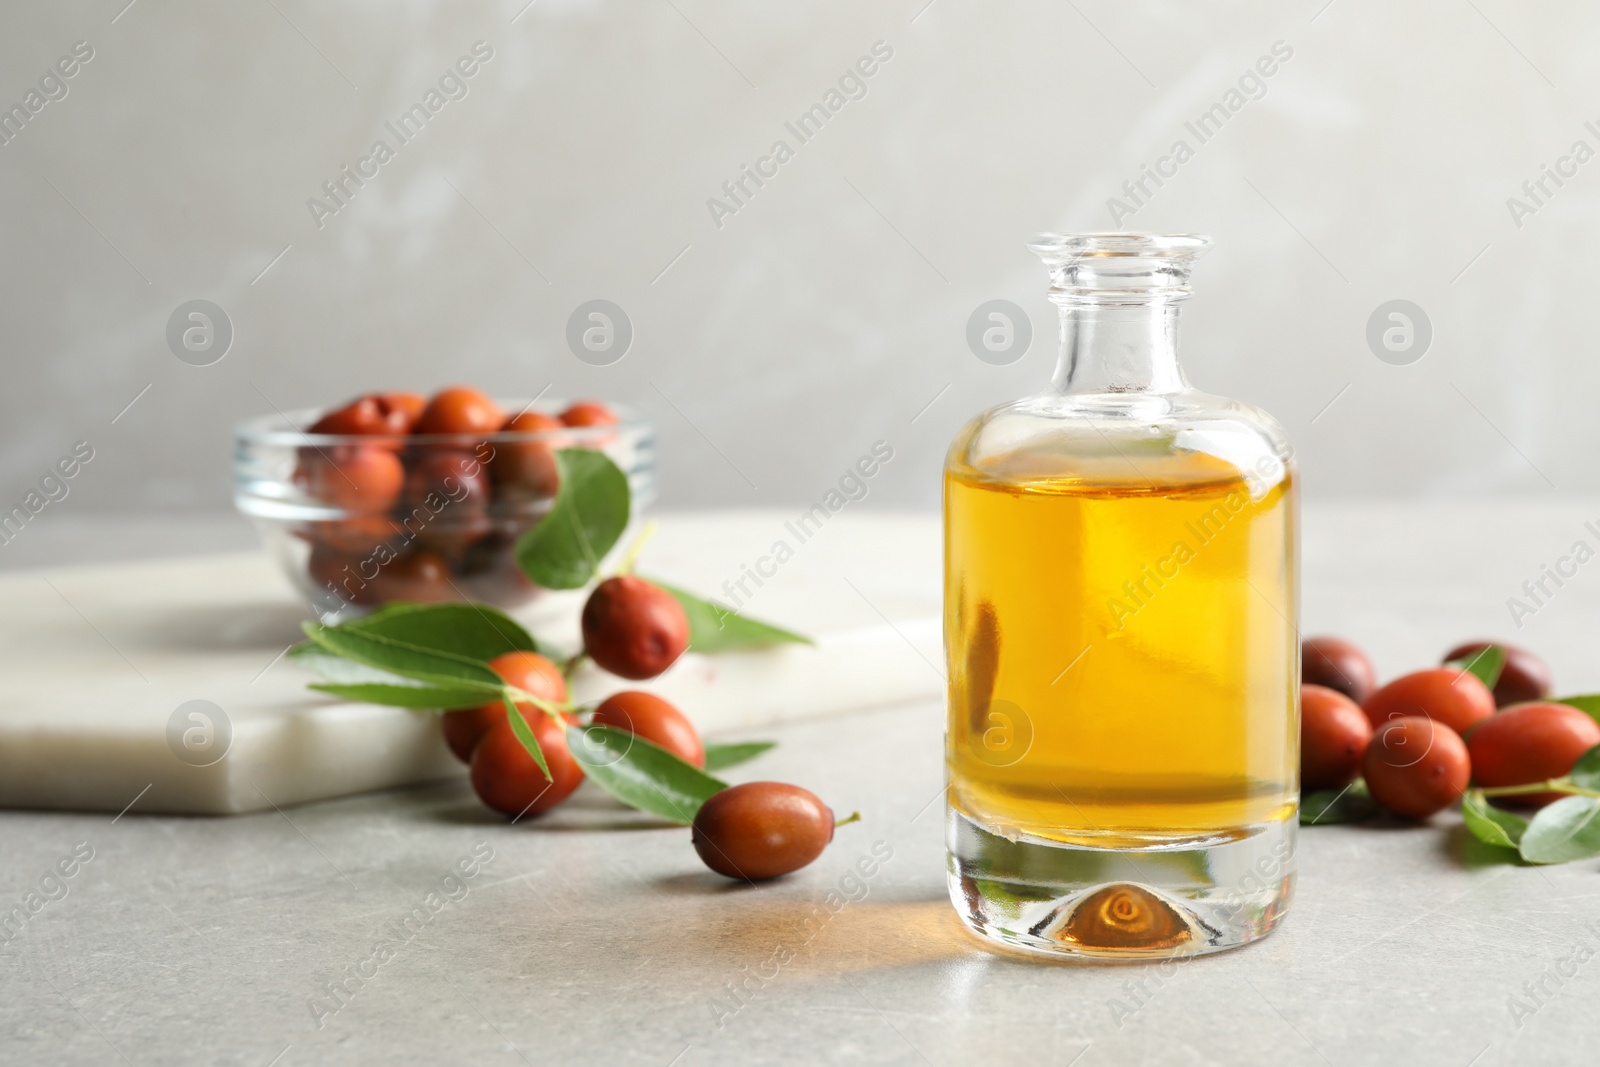 Photo of Jojoba oil in glass bottle and seeds on light grey table